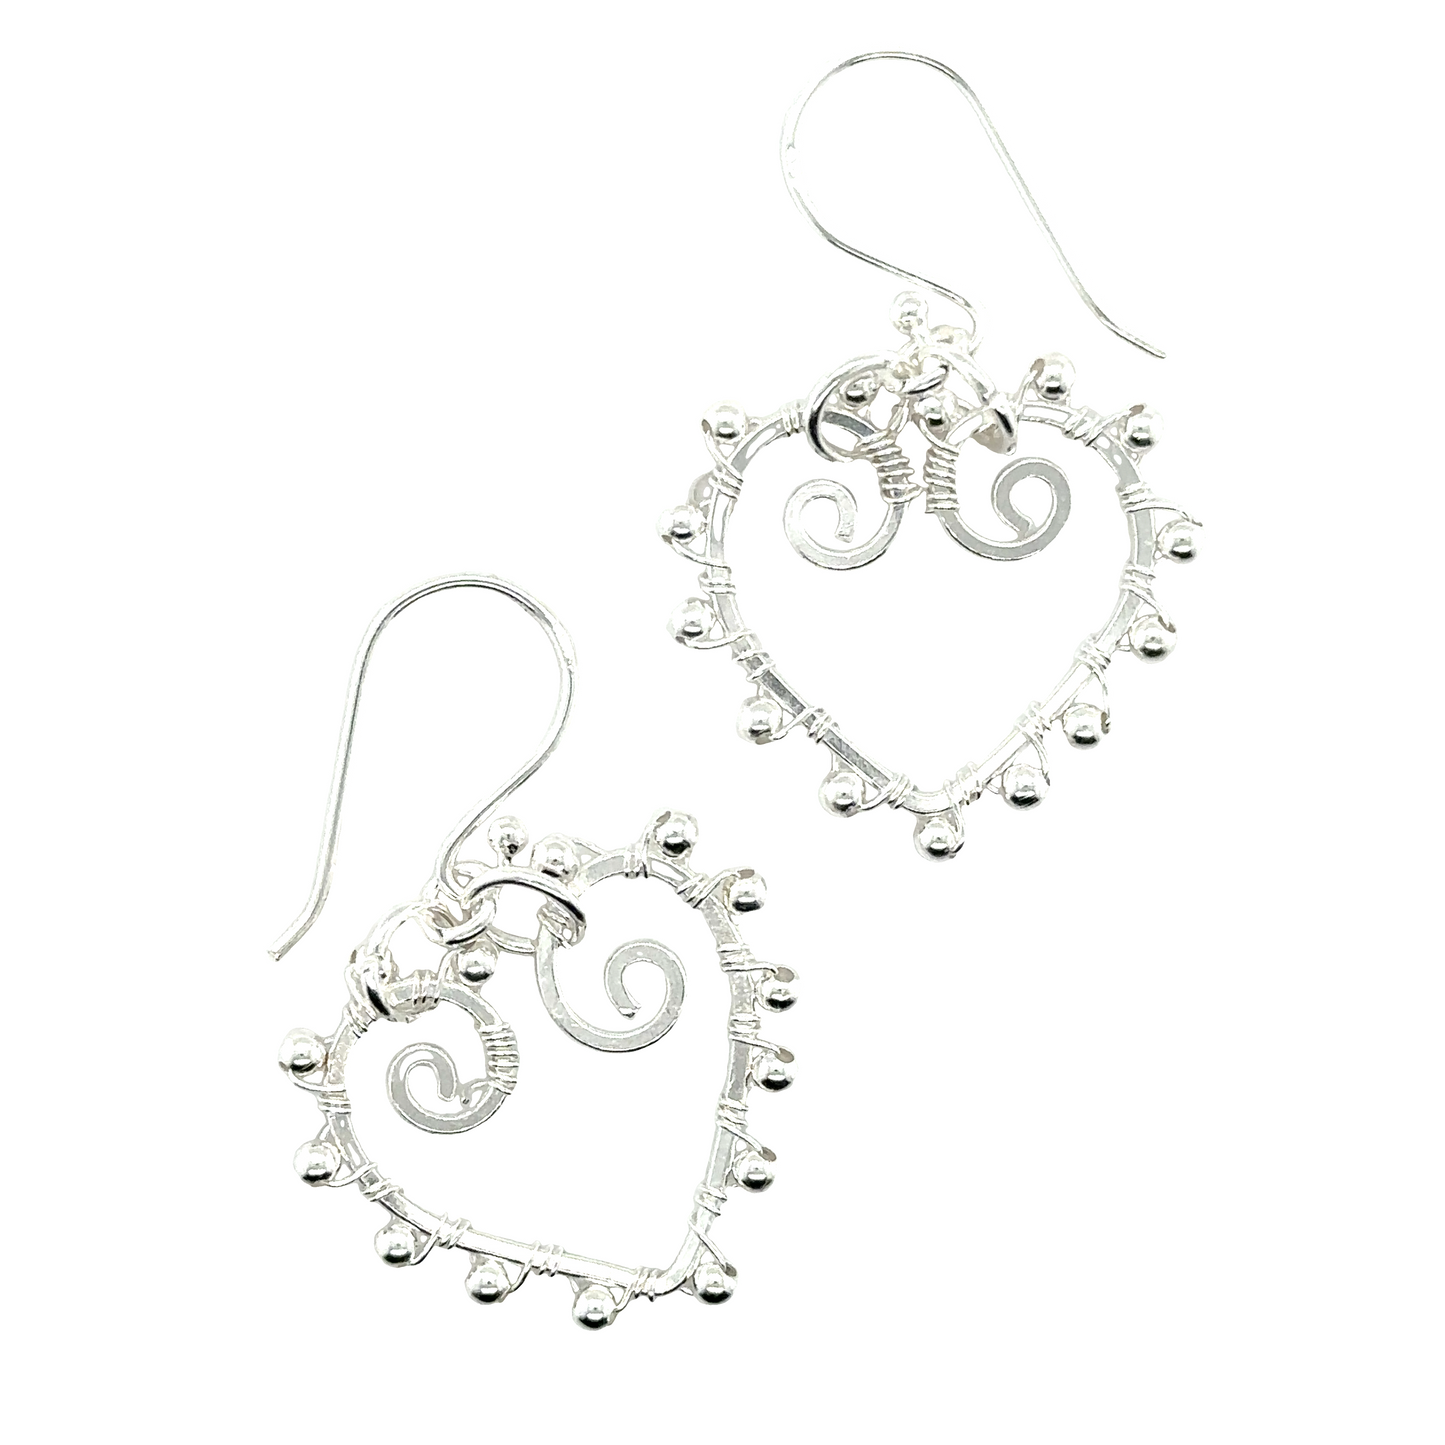 These lightweight Heart Earrings with Silver Beads from Super Silver are perfect for everyday wear. They feature a stunning silver design and are displayed on a clean white background.